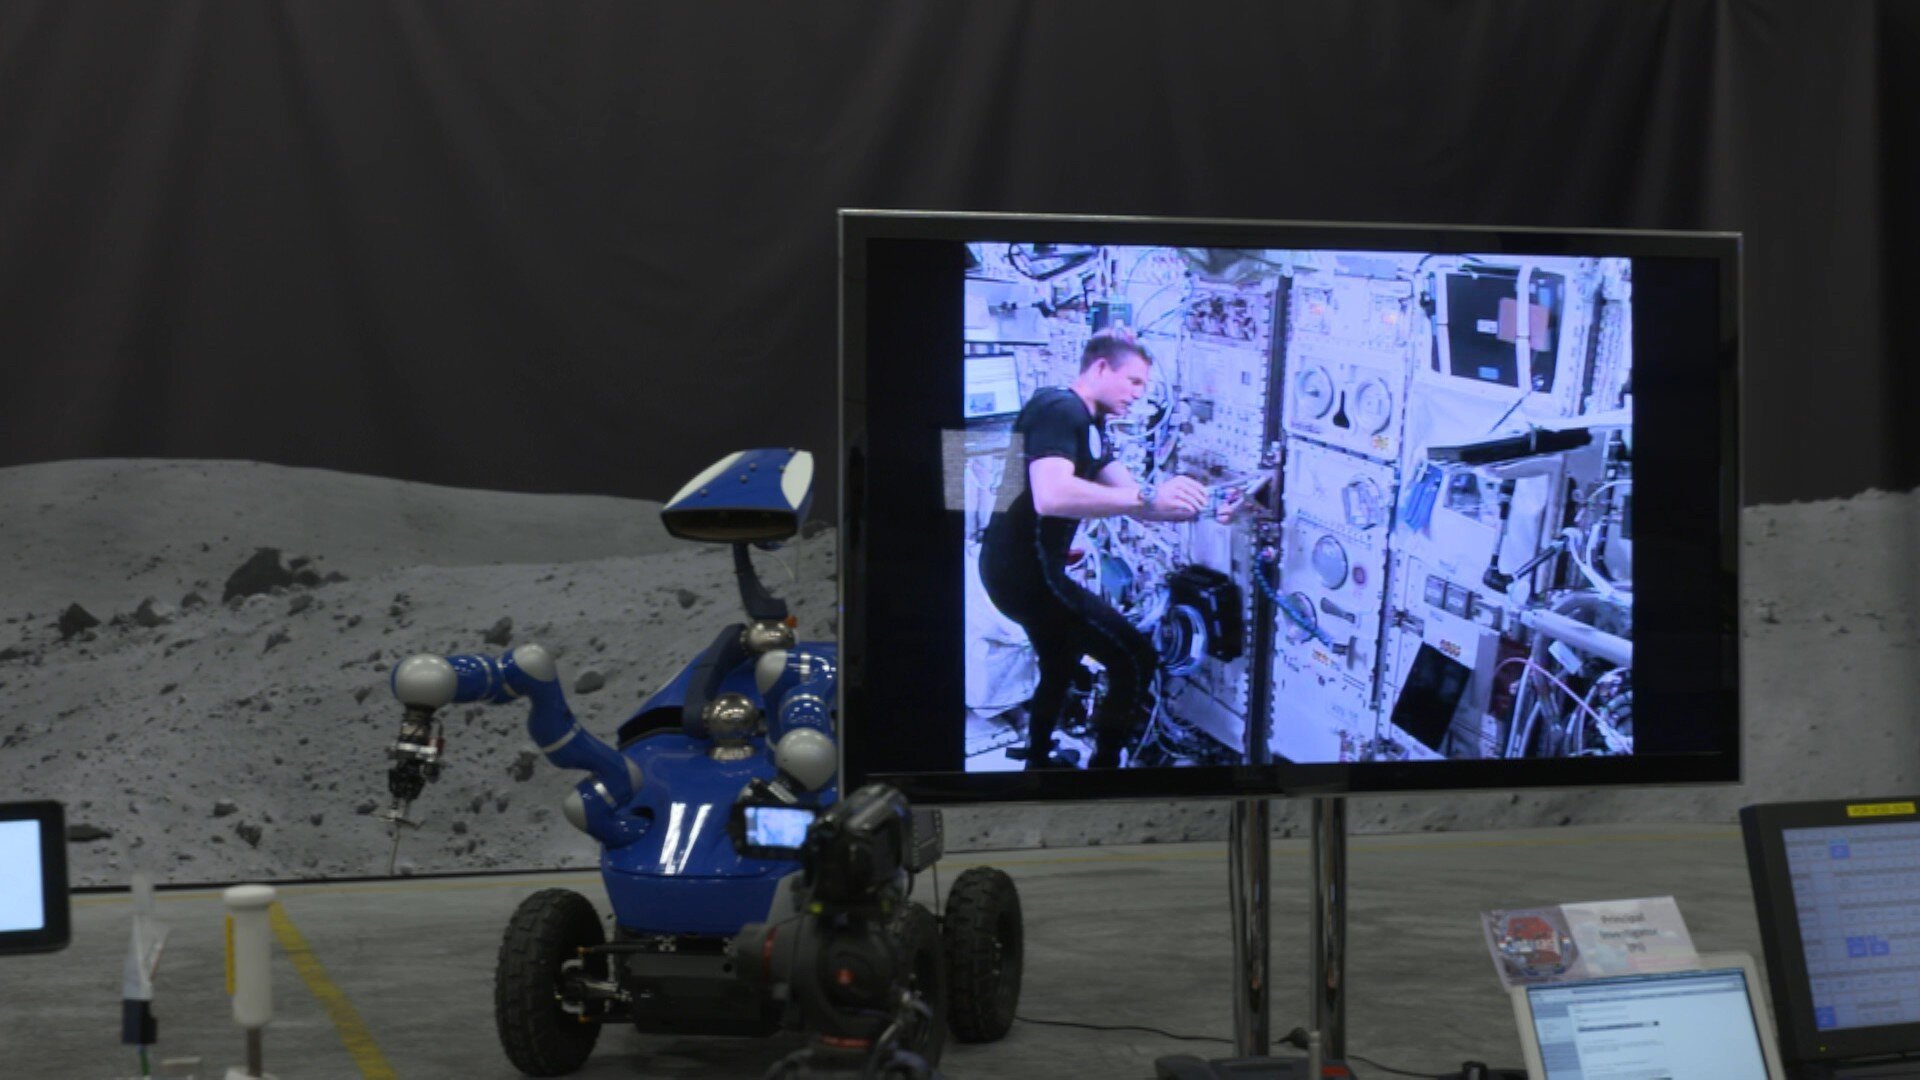 Andreas controlling rover